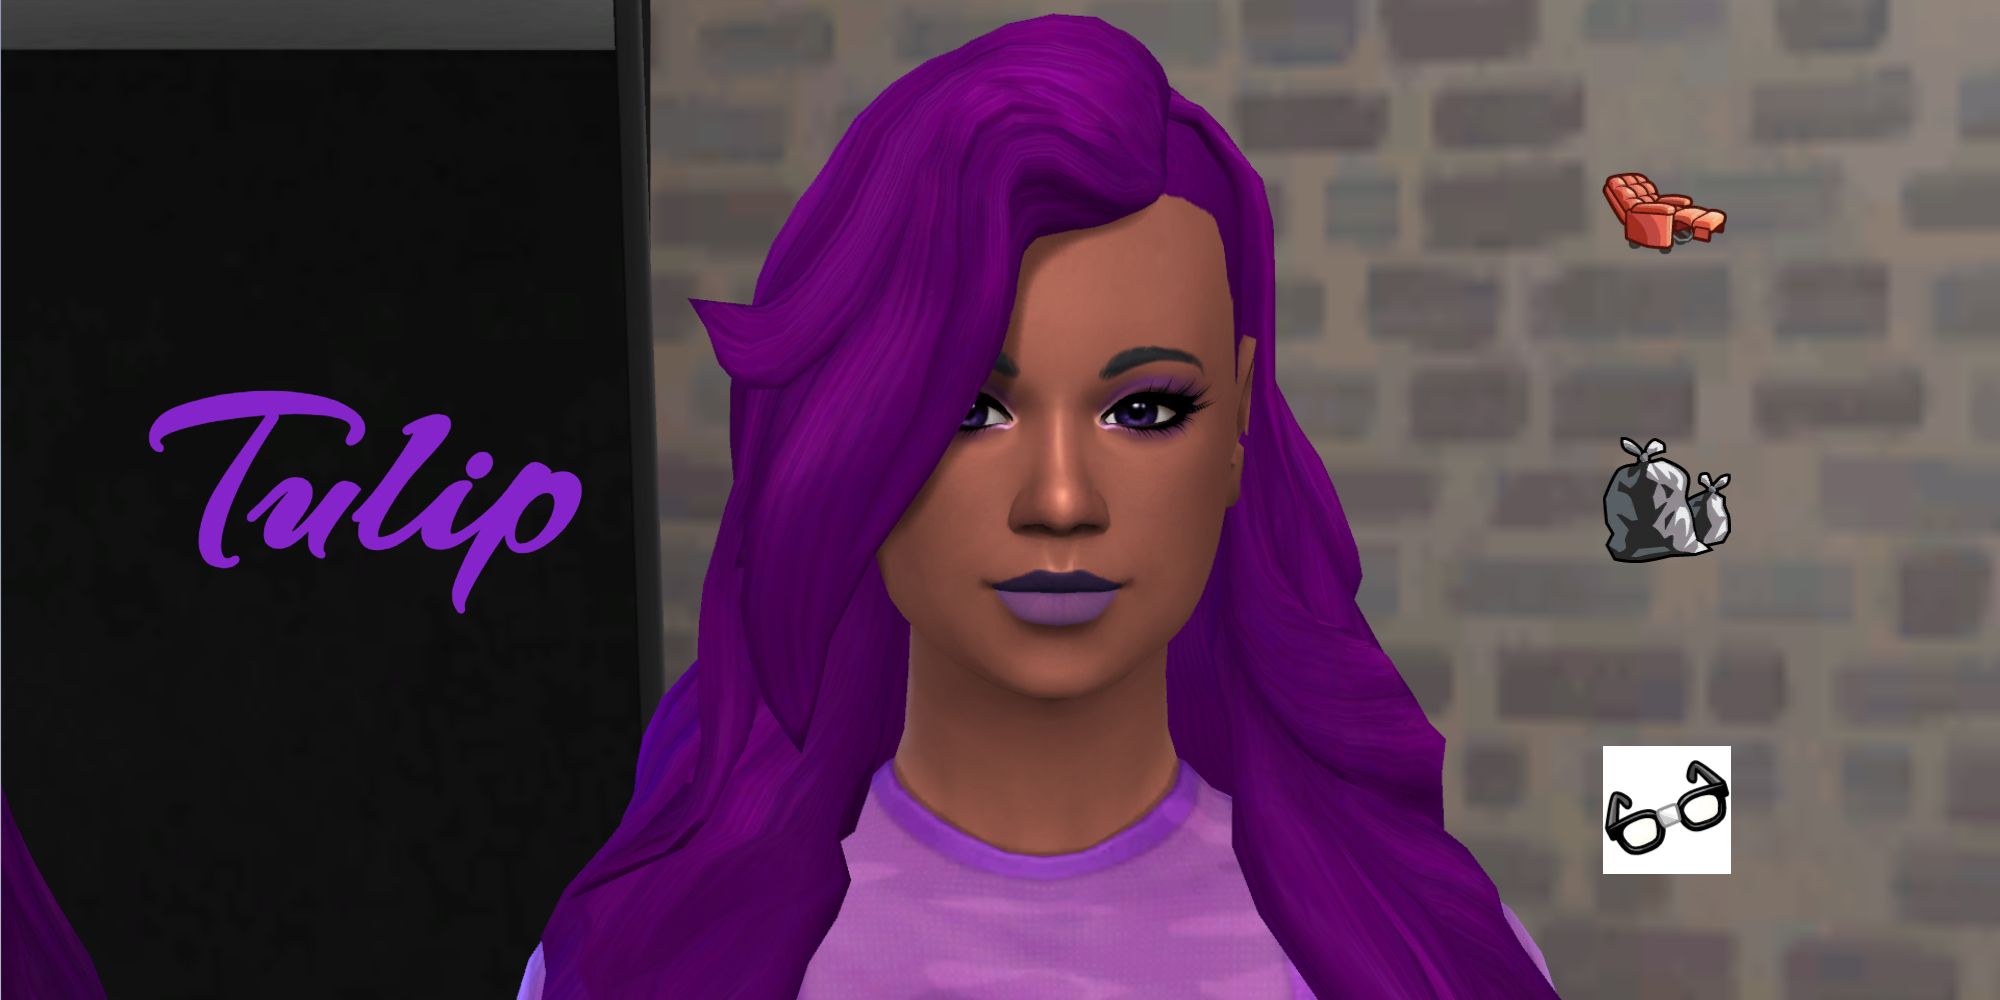 A purple-haired Sim from the tulip generation